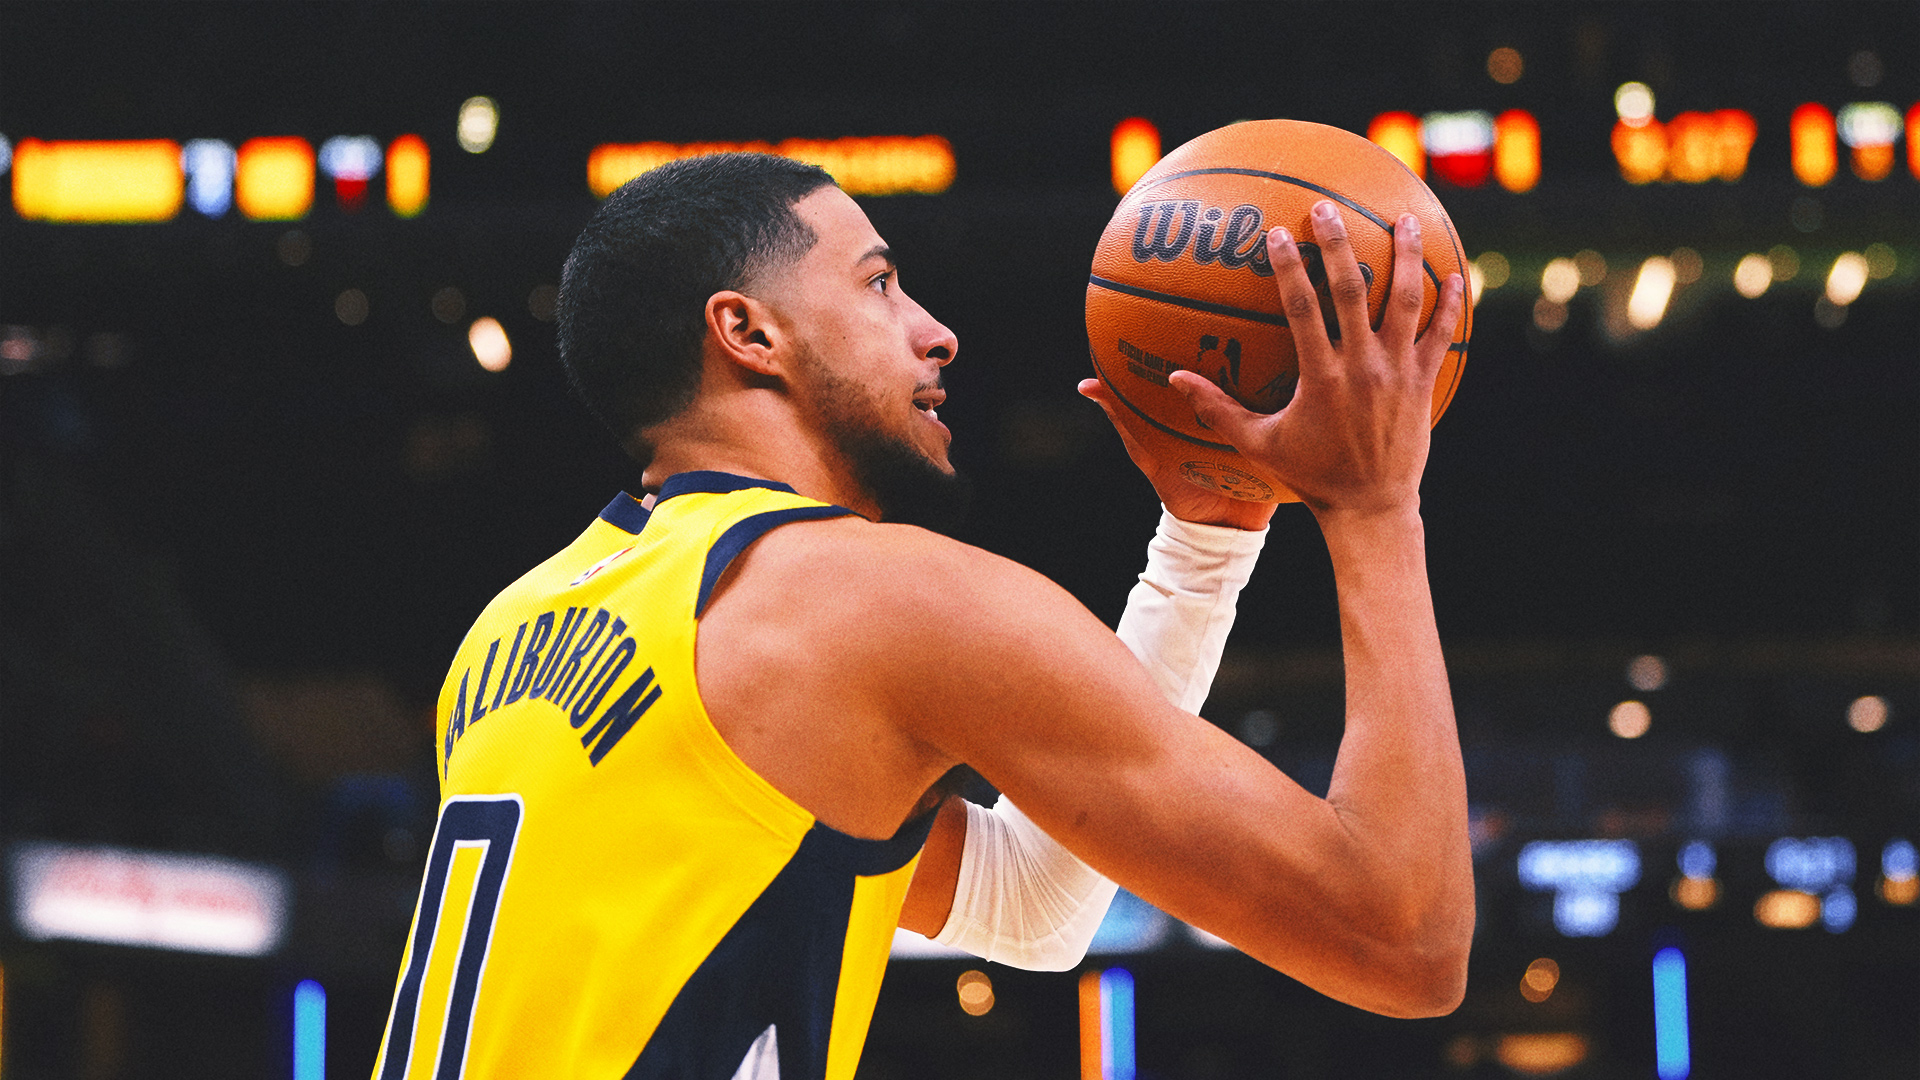 Tyrese Haliburton has 18 of Indiana's team-record 50 assists, Pacers rout Hawks 150-116 for 6th win a row